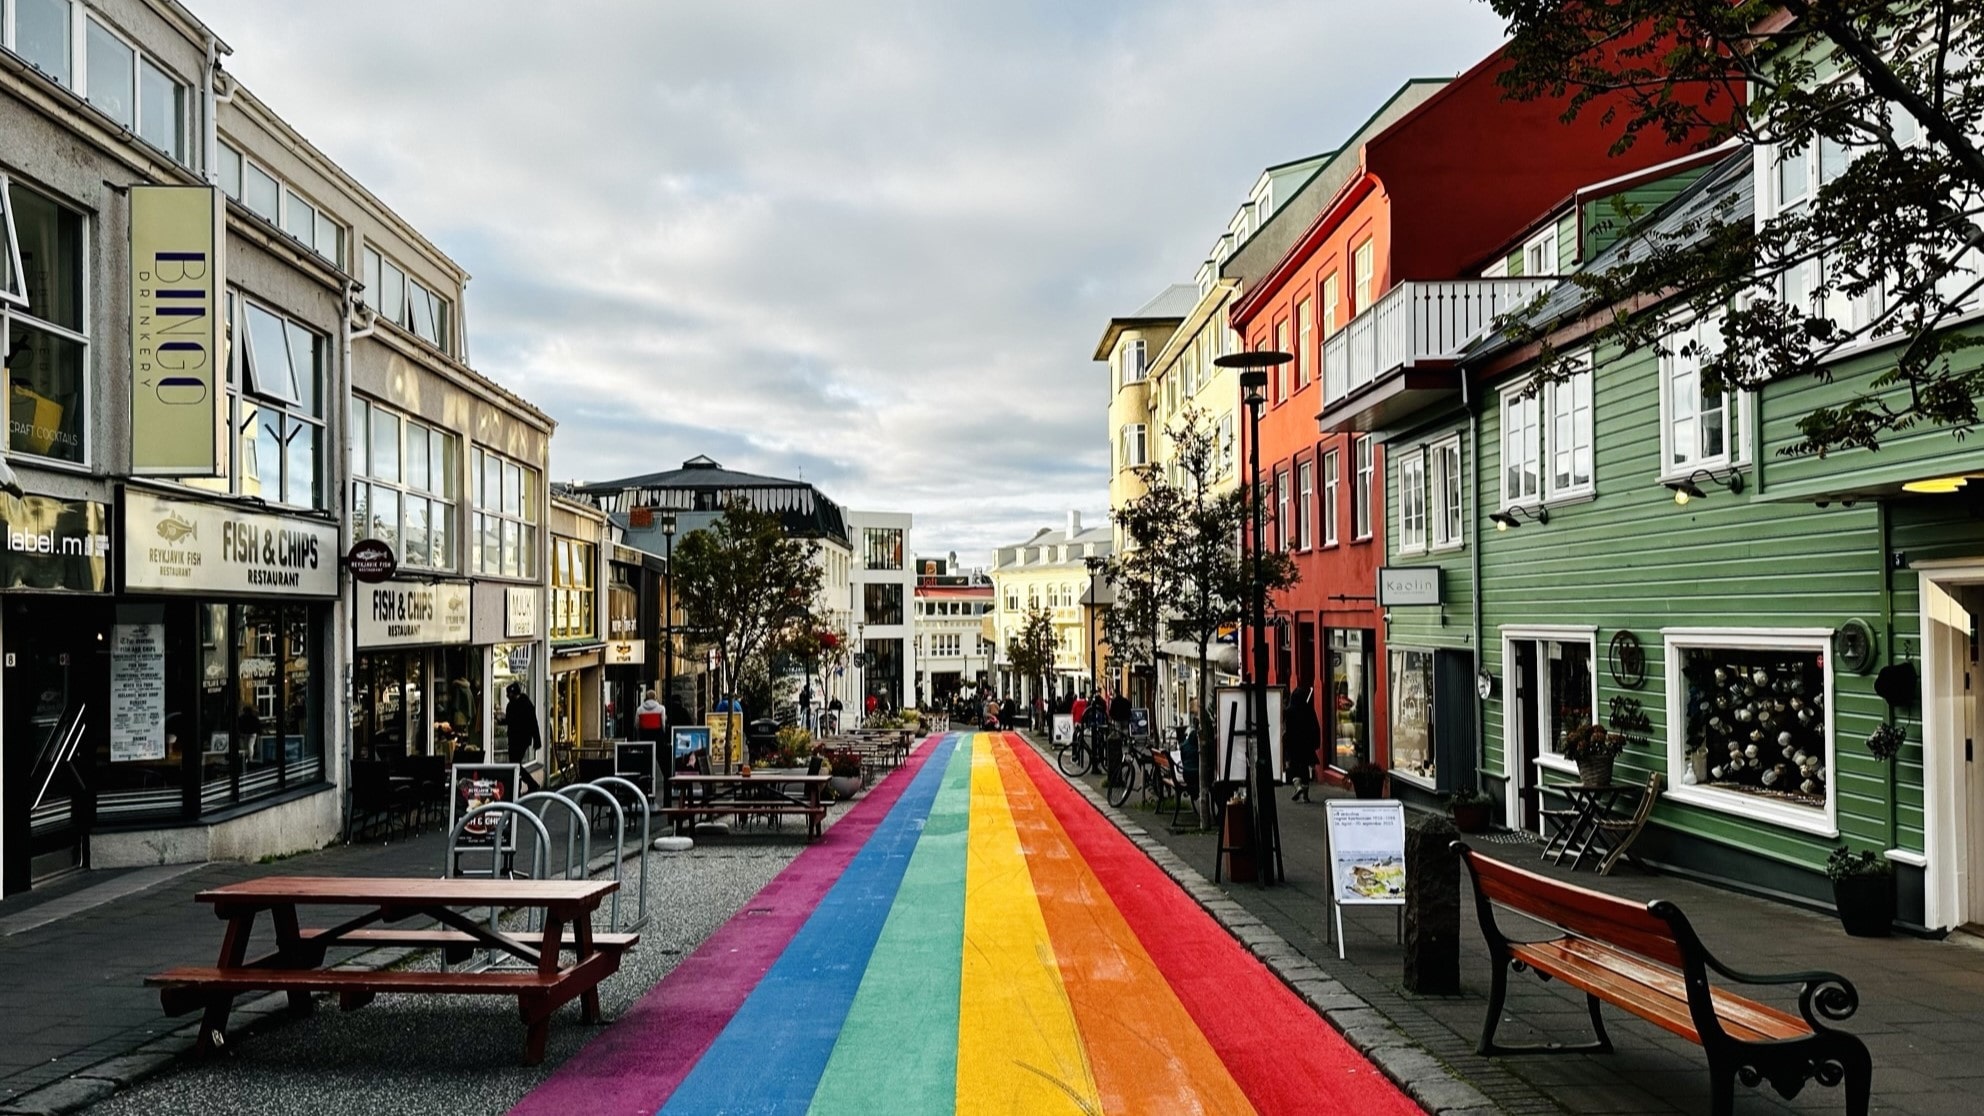 Iceland is well known for its branding as a queer friendly country, visible here at a section of the Rainbow Street (Skólavörðustígur) in Reykjavik, Iceland